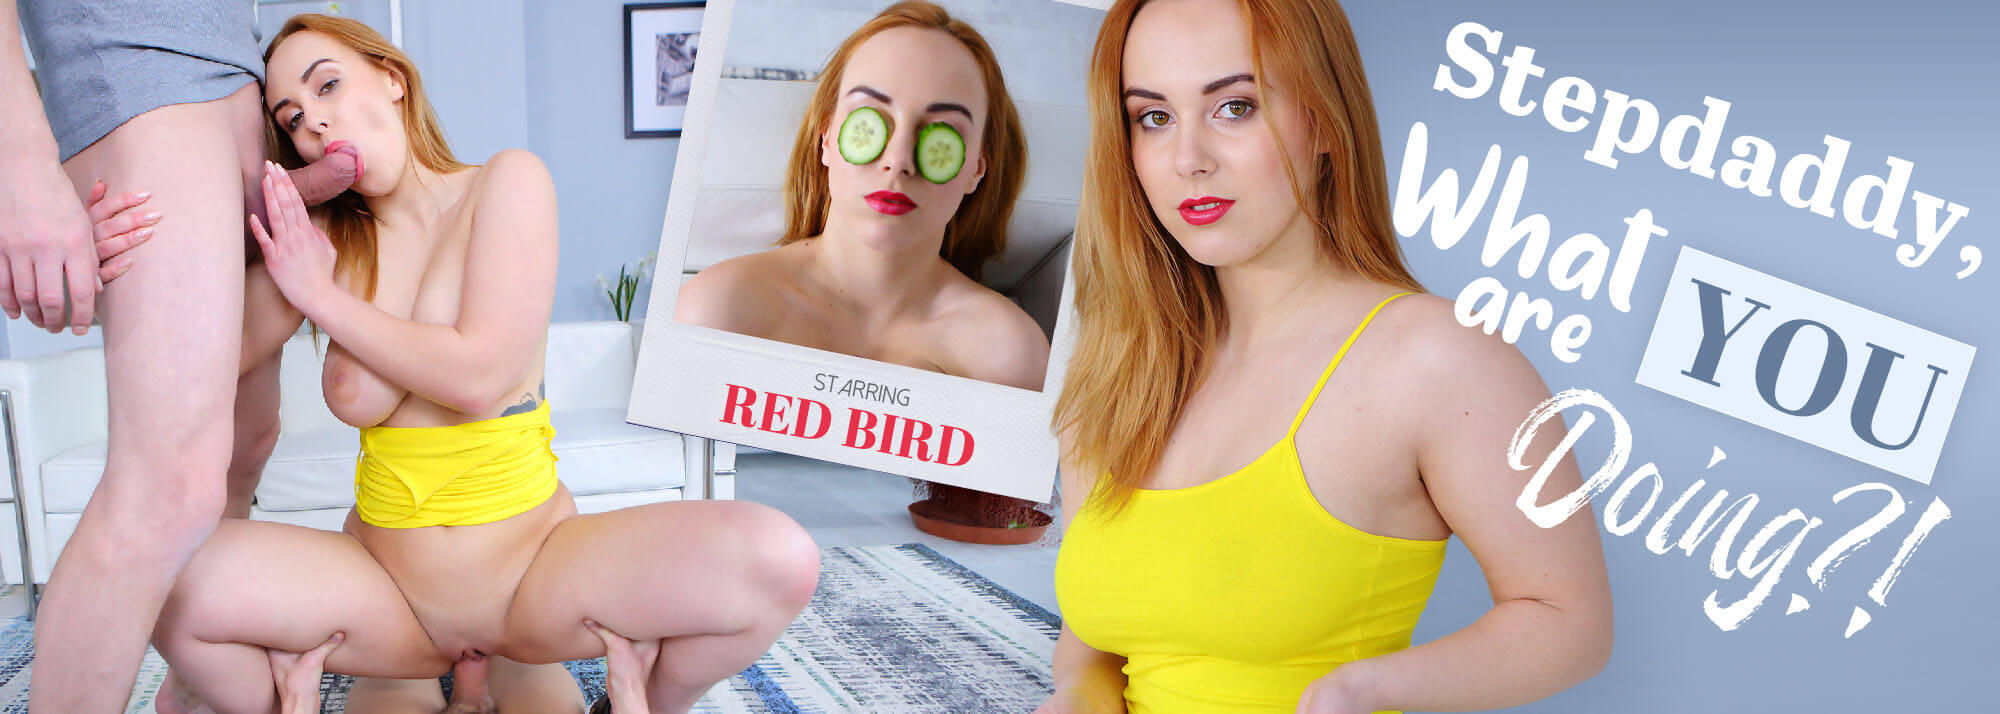 Stepdaddy, What Are You Doing?! - VR Porn Video, Starring: Red Bird